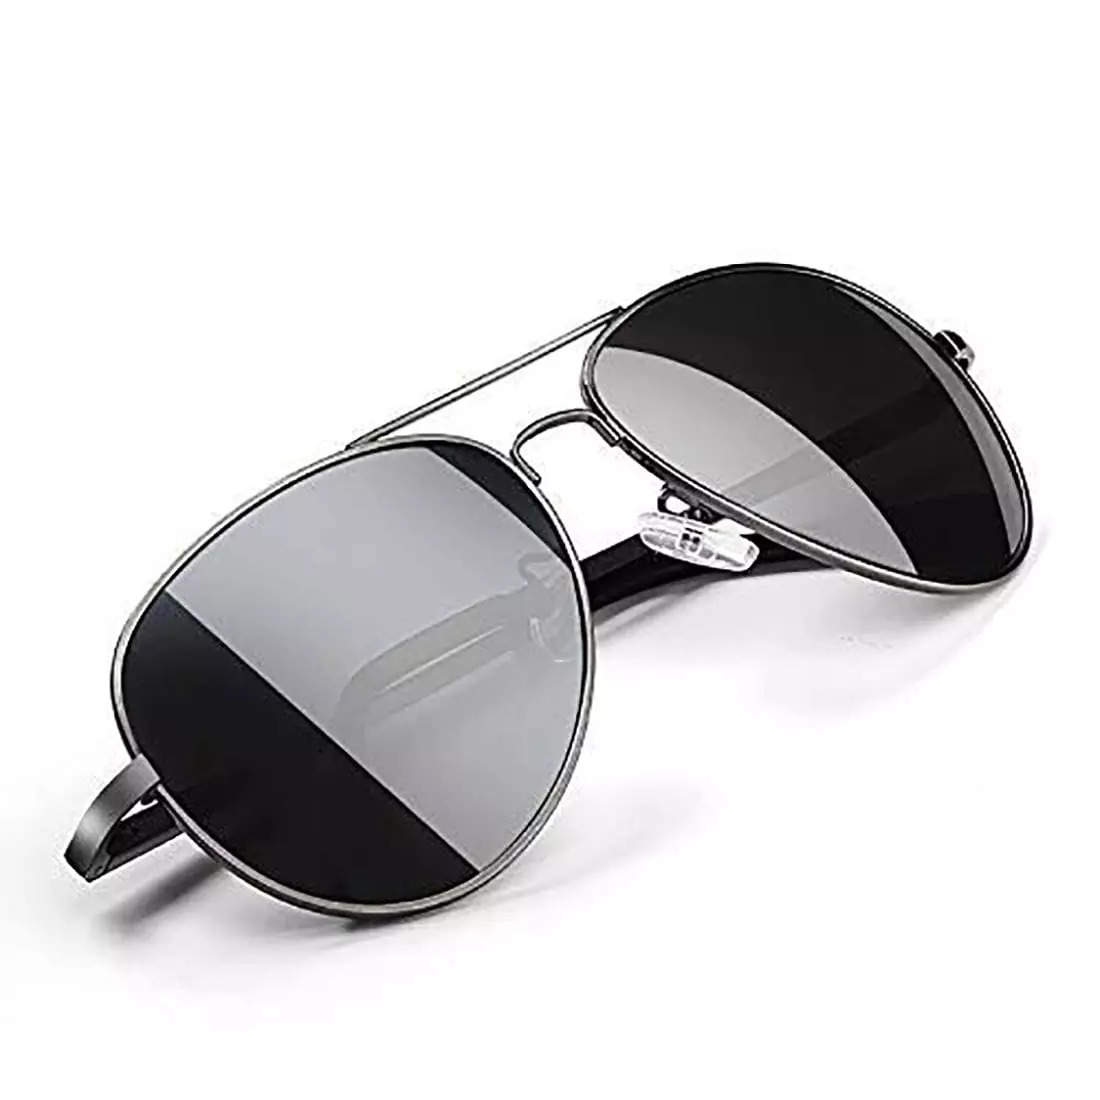 44% OFF on elegante Branded Metal Body Silver Square inspired from Kabir  Singh Sunglass for Men and Boys on Amazon | PaisaWapas.com